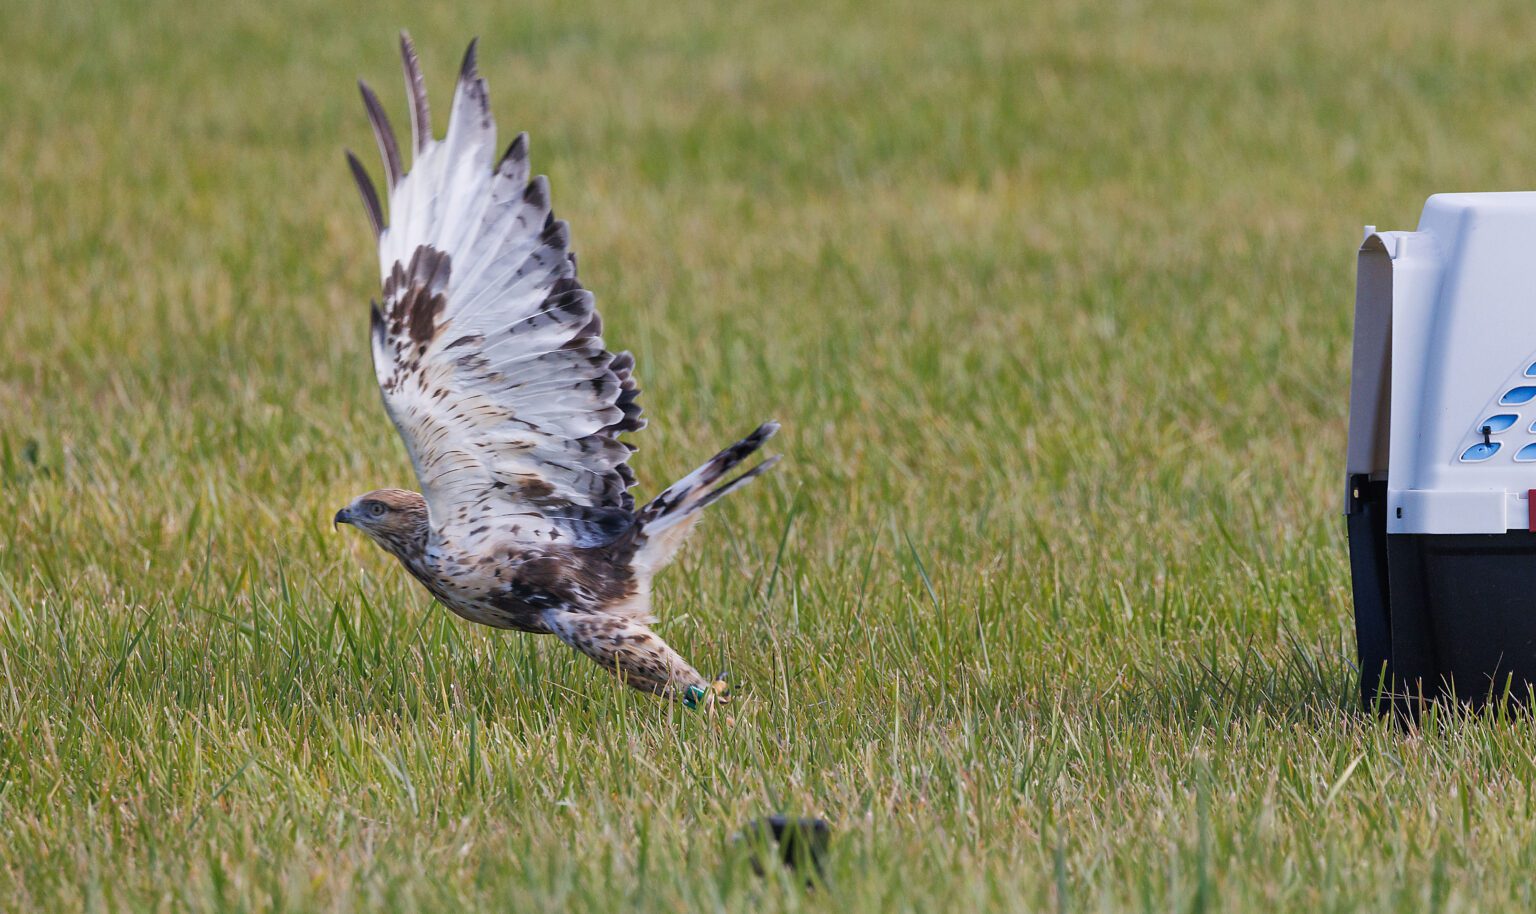 A rough-legged hawk leaps out of its crate and takes off after being released into the wild on Nov. 2 in Bow. The bird was hit by a plane and severely injured. PAWS